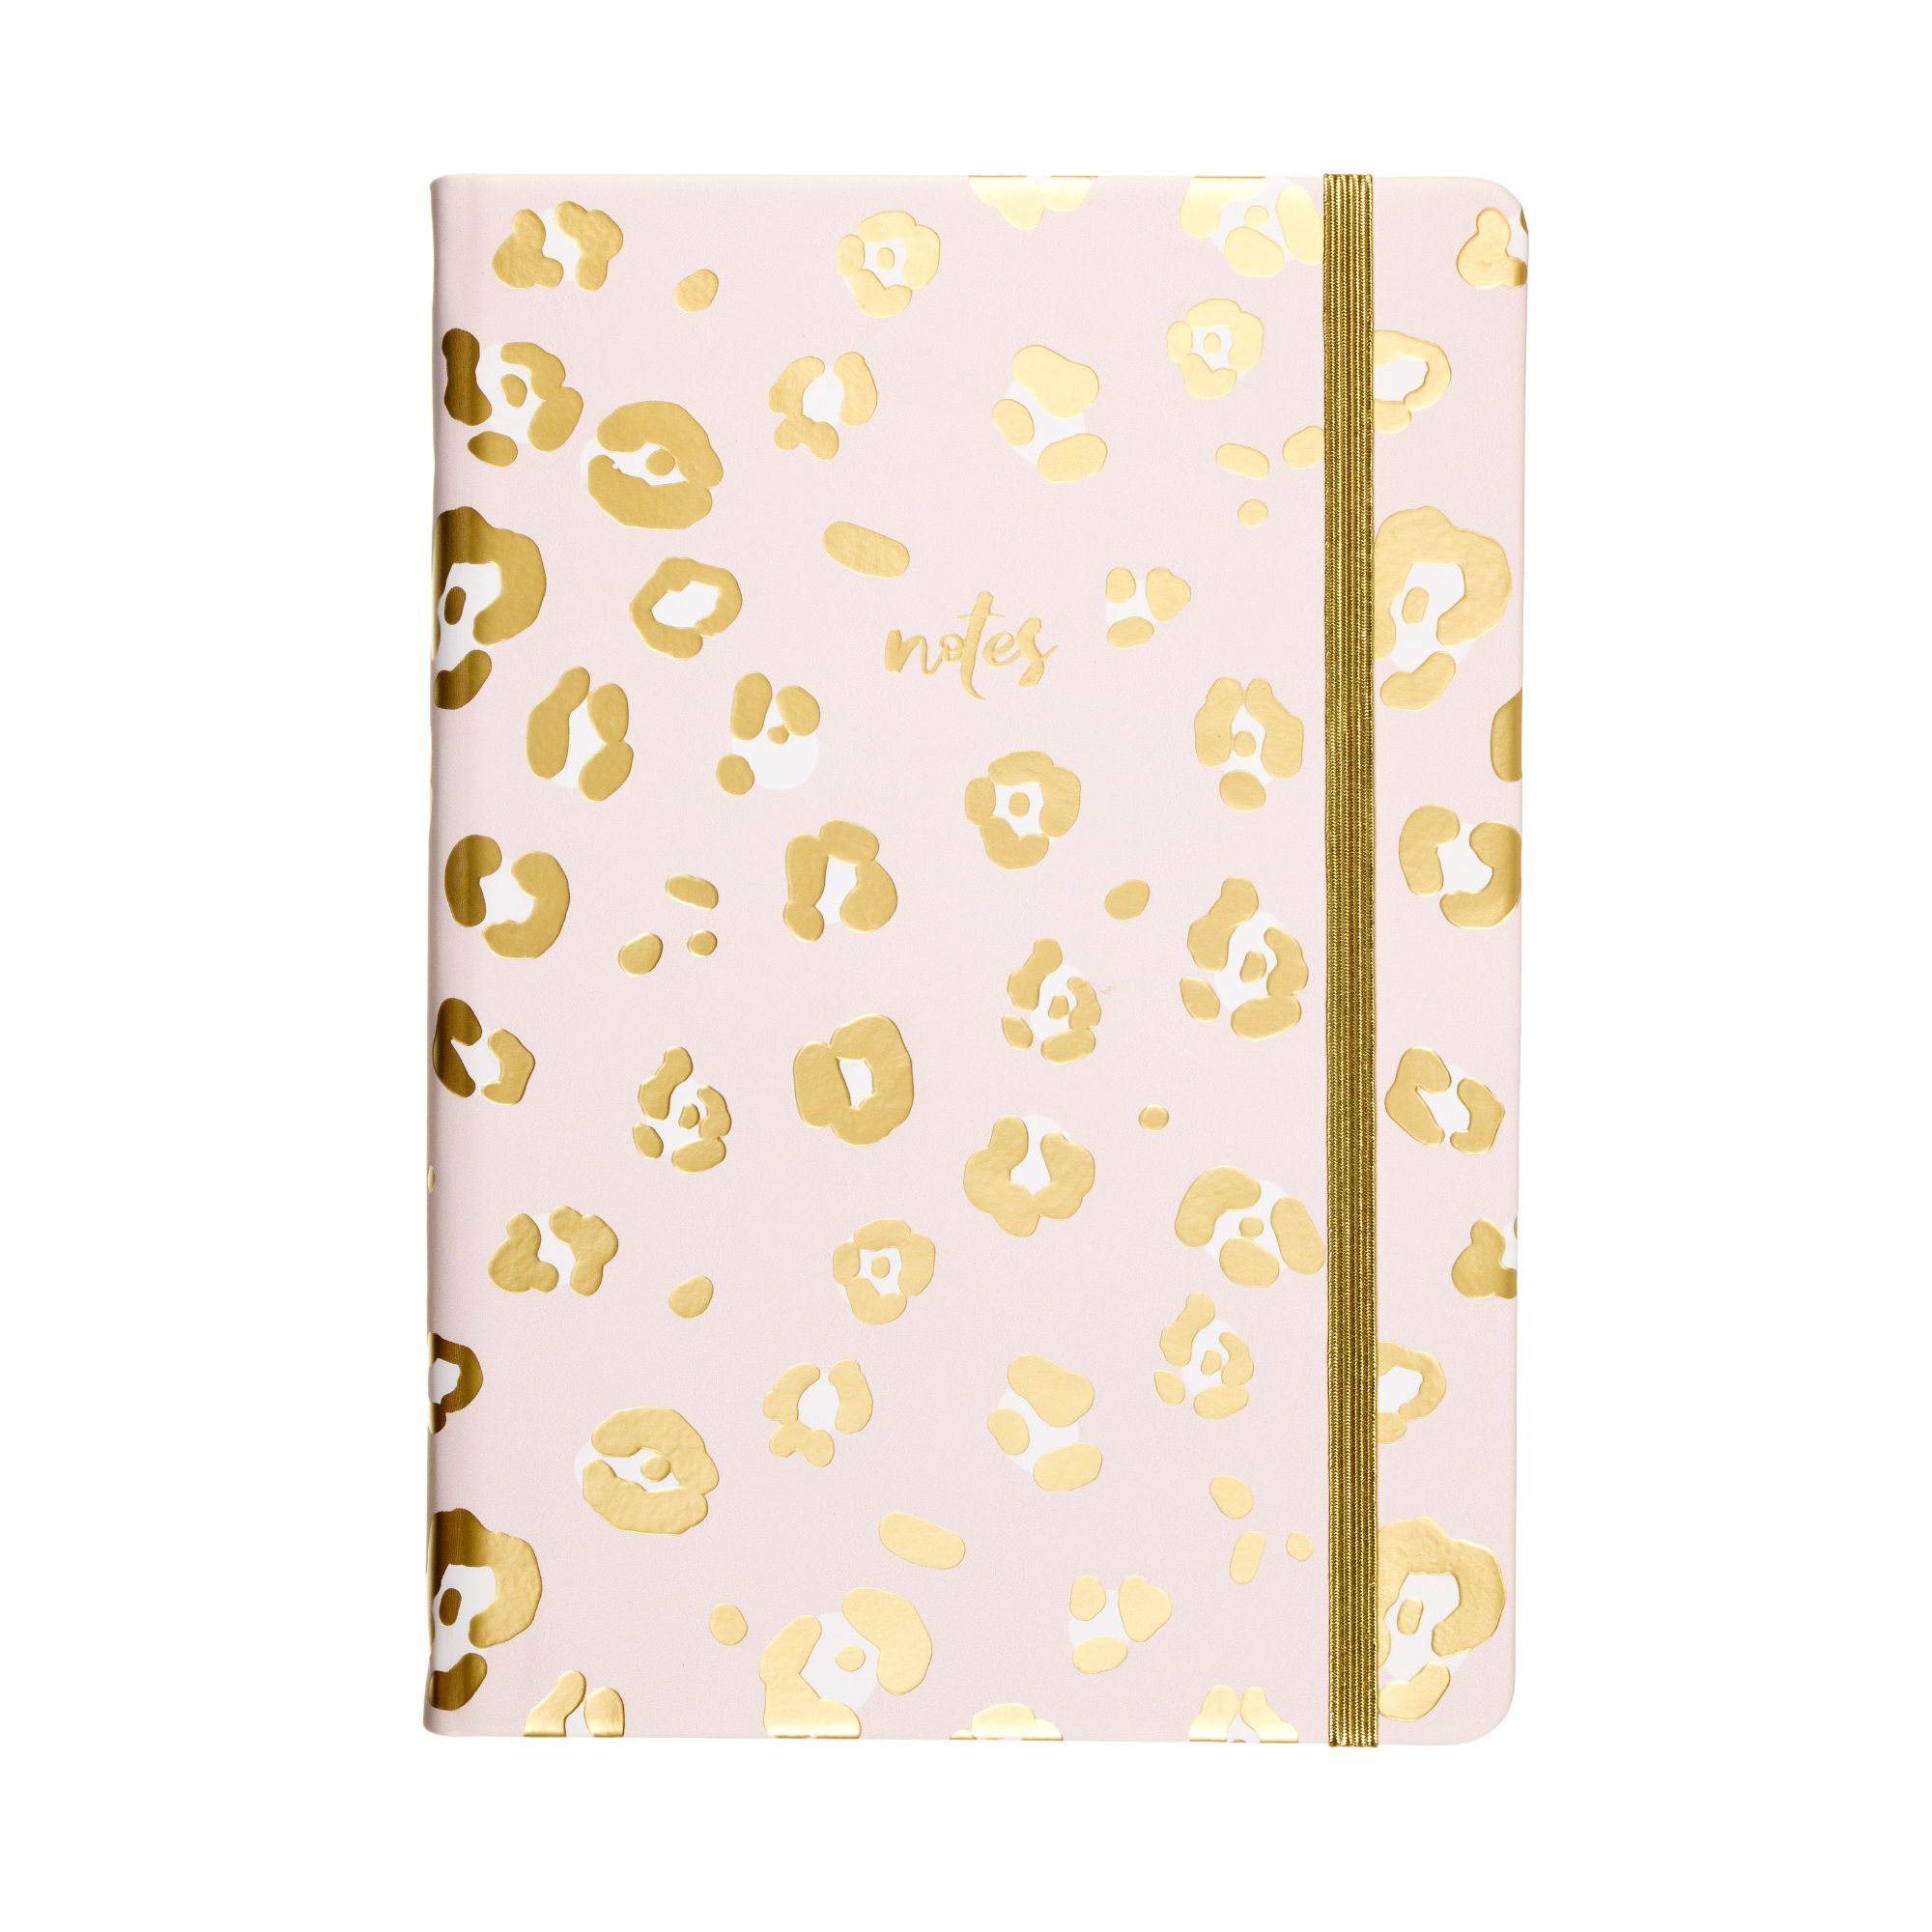 Foiled Cheetah Journal with Elastic Strap 
															/ Eccolo							